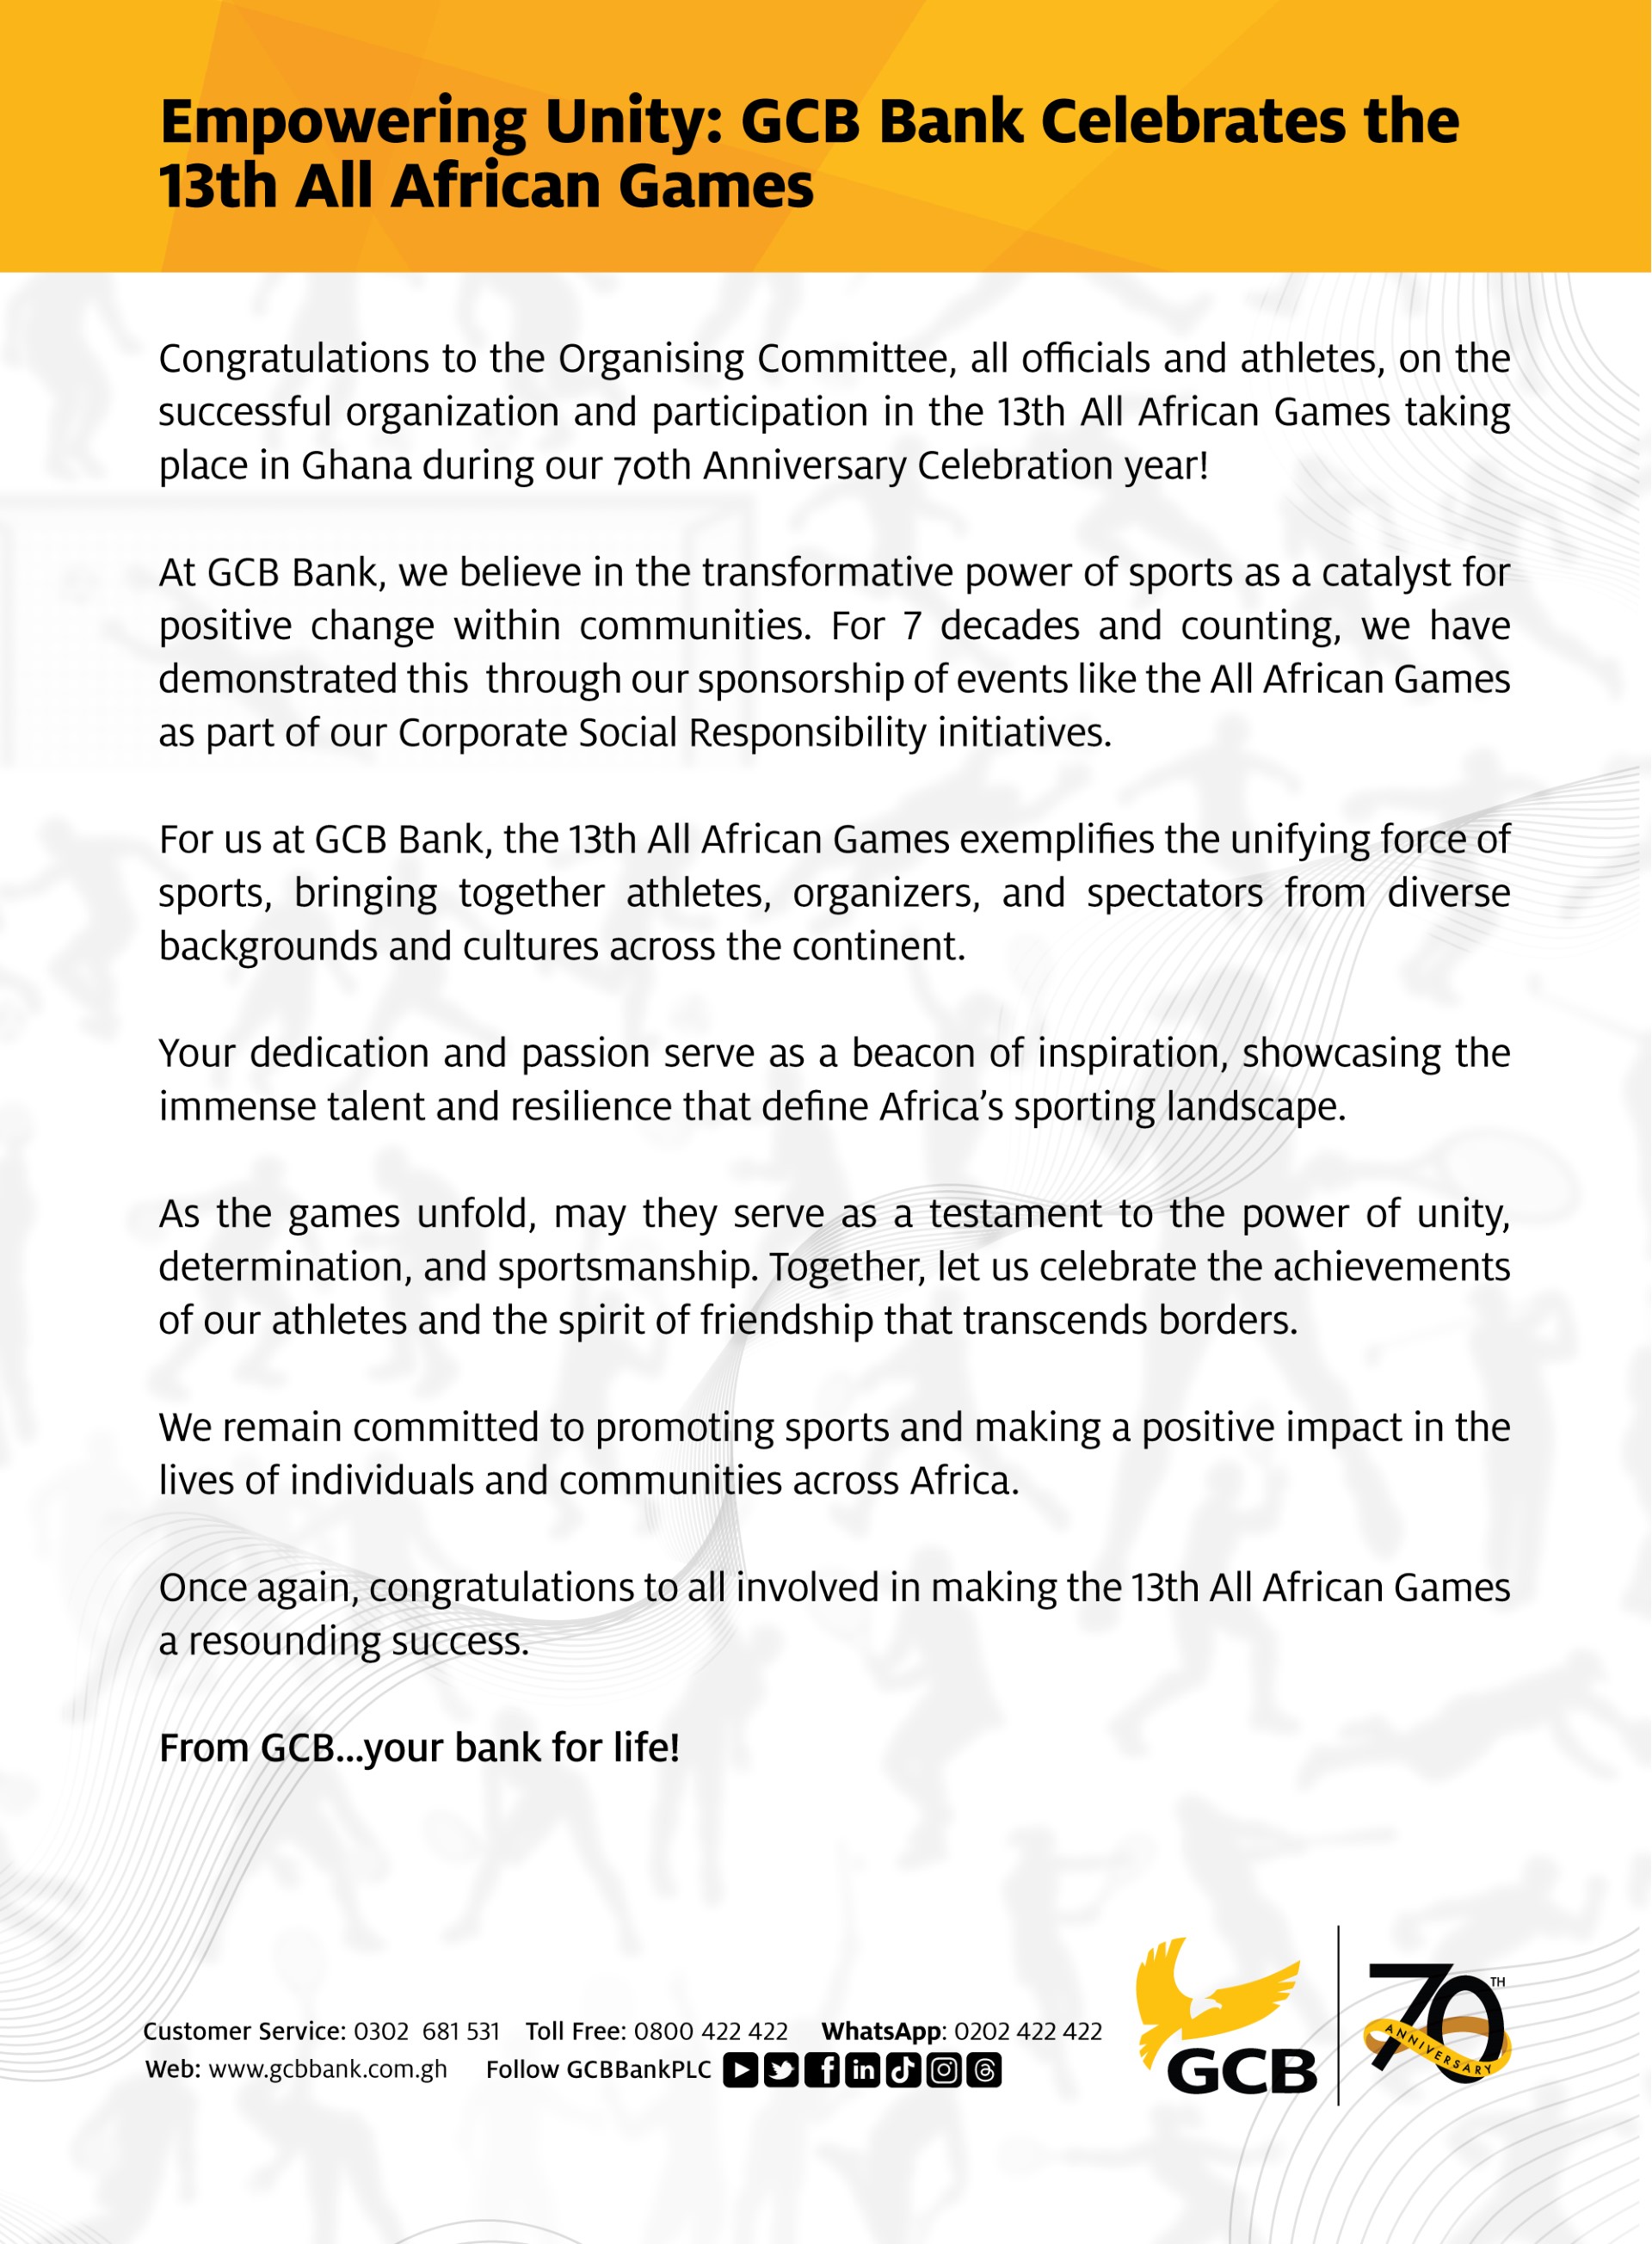 Empowering Unity: GCB Bank Celebrates The 13th All African Games